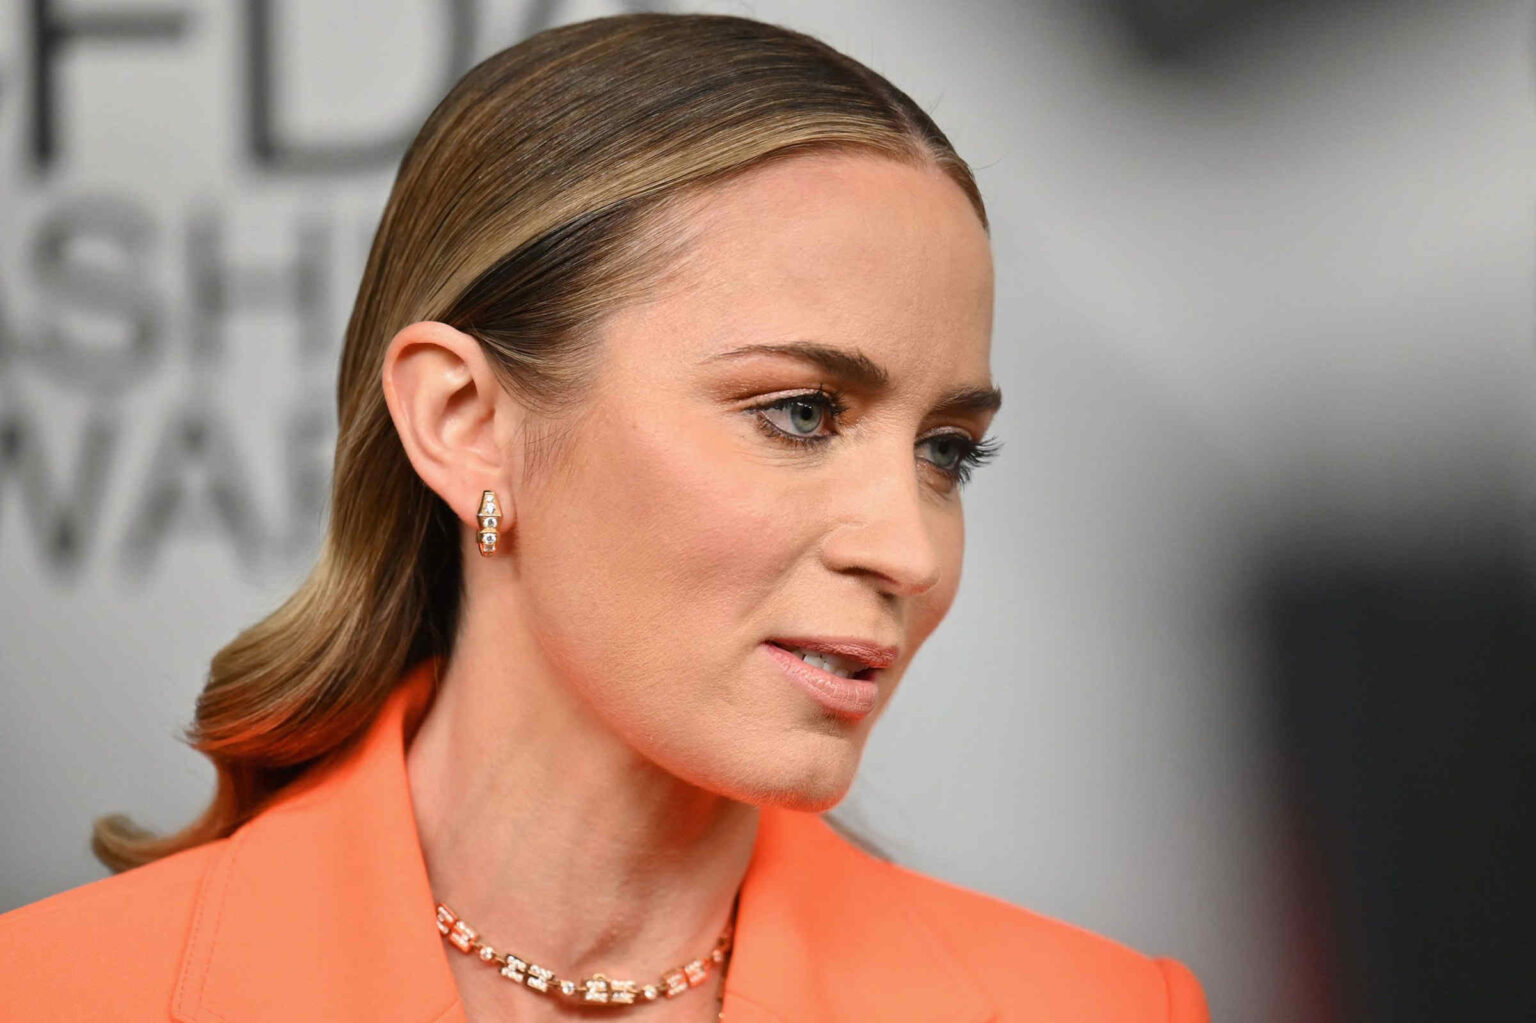 Is emily blunt really phoning it in after seeing the devil wear Prada? Take a look at her latest interview and see whats next for her!